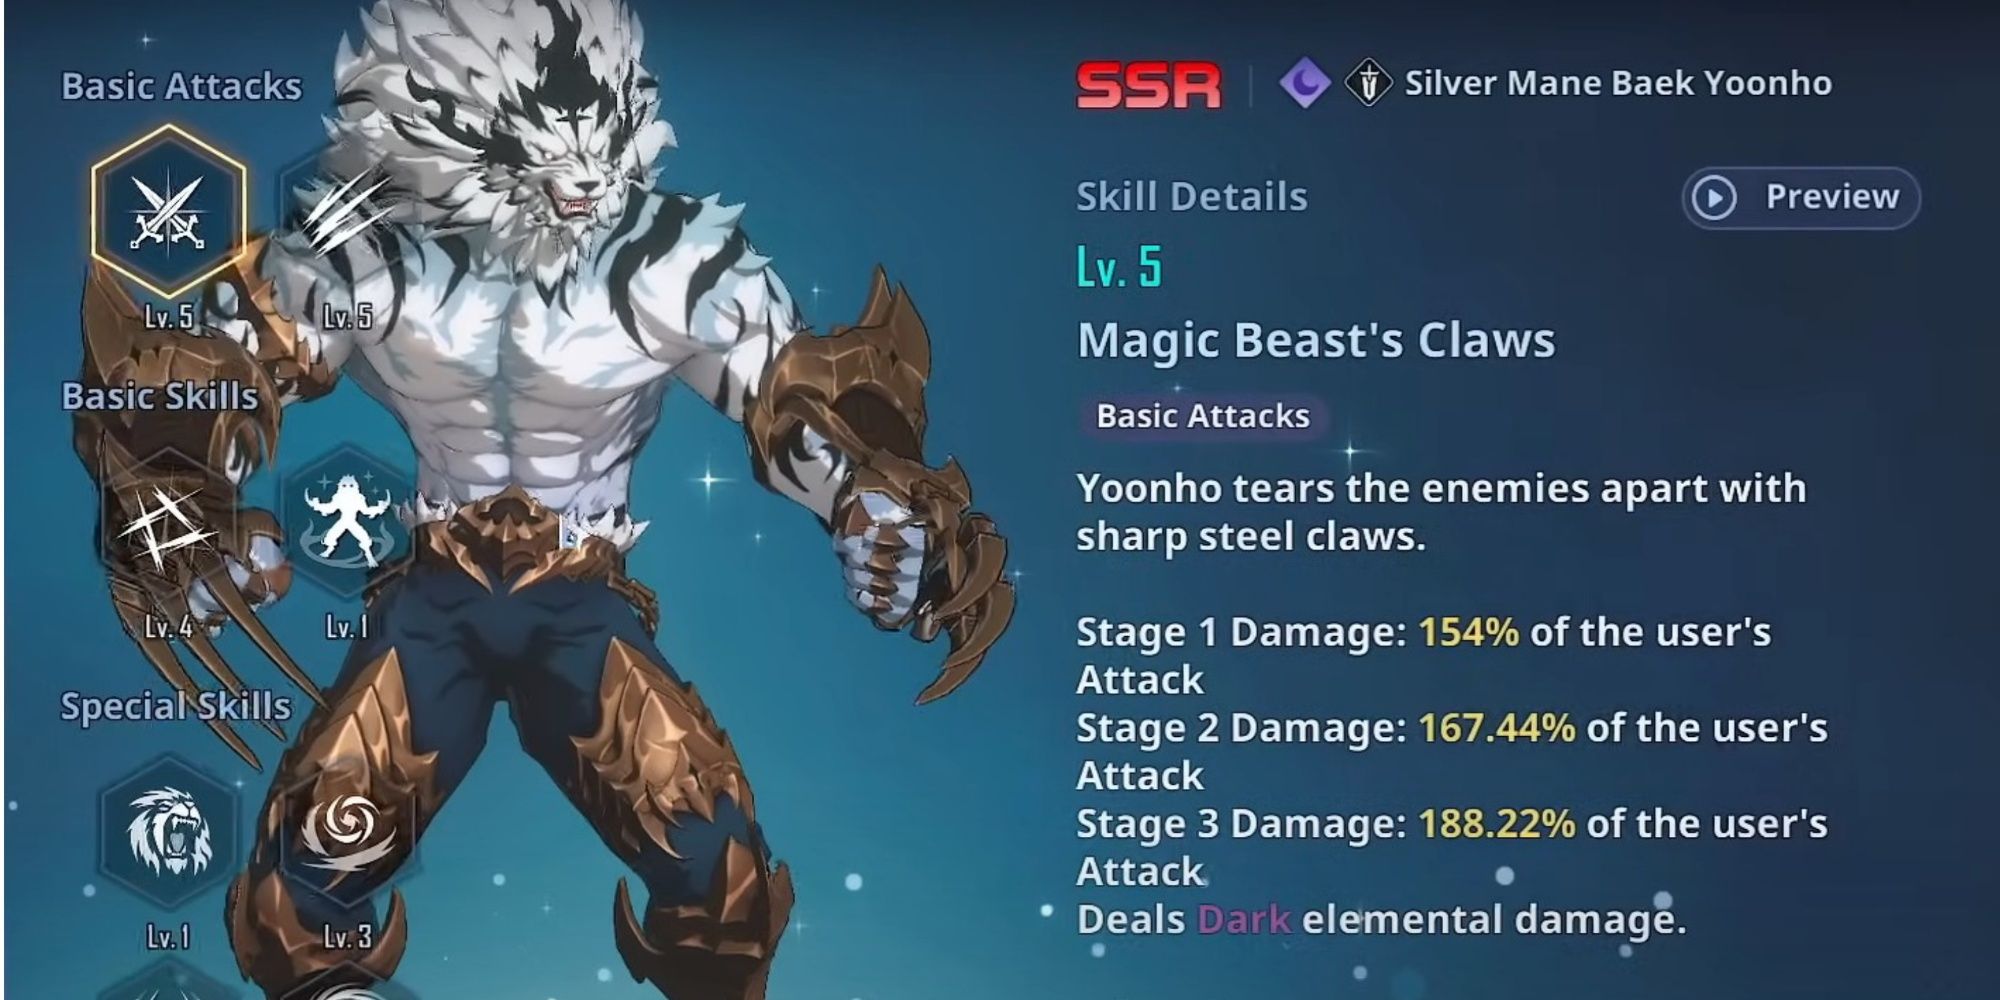 Silver Mane showcase with his skill details